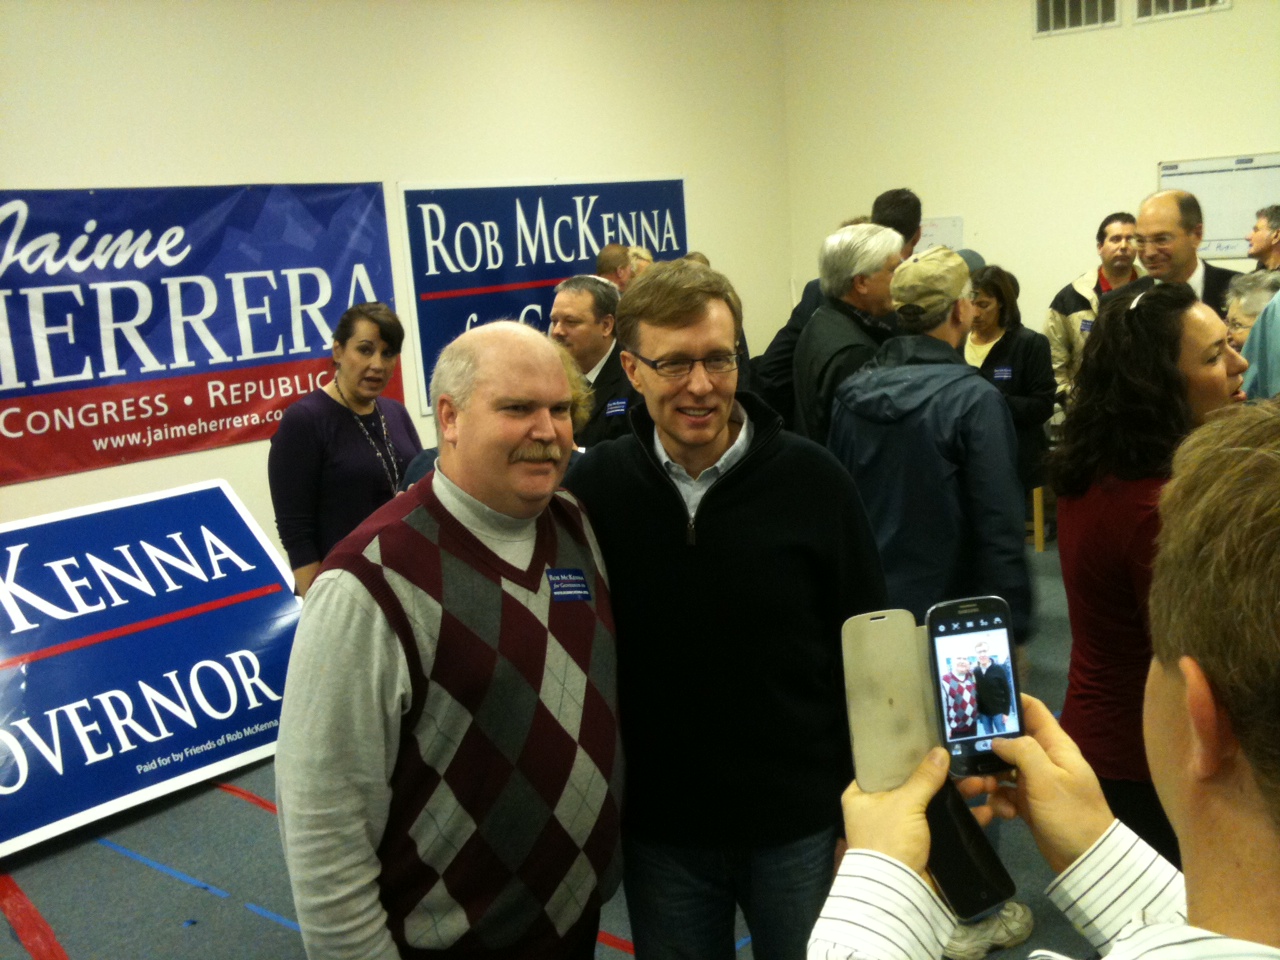 Republican gubernatorial candidate Rob McKenna poses for a photo with former La Center City Councilman Troy Van Dinter at a Hazel Dell rally today.